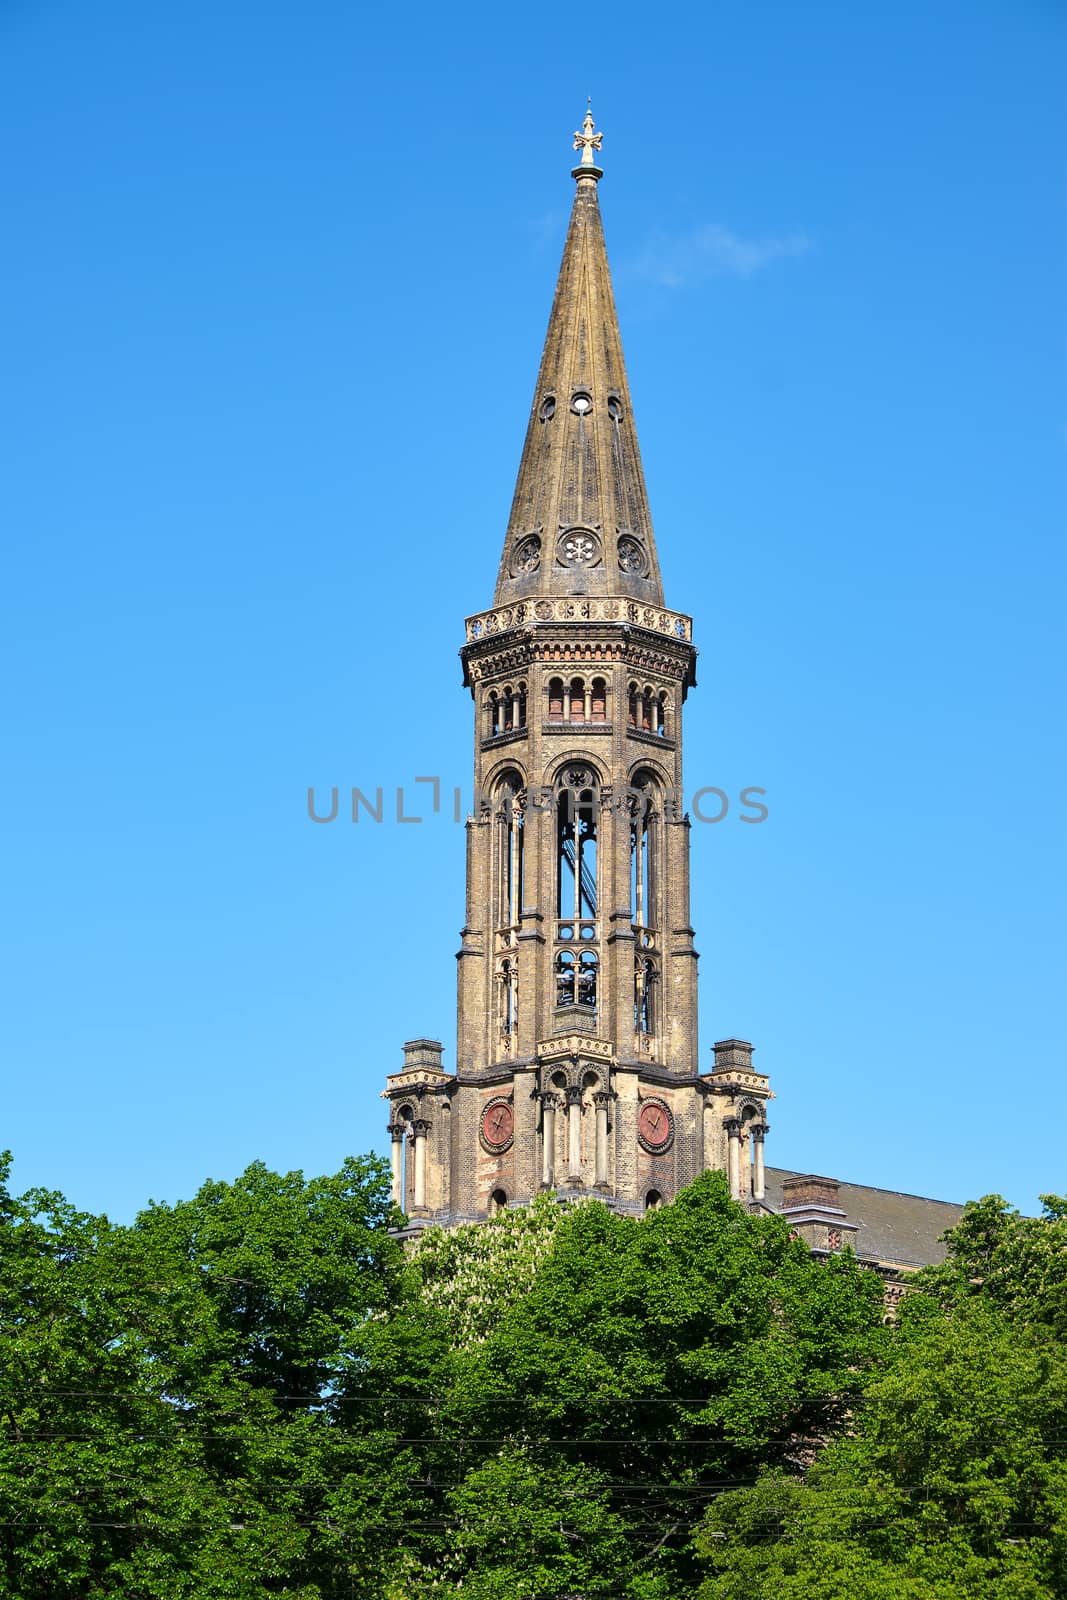 The bell tower of the Zionskirche in Berlin, Germany